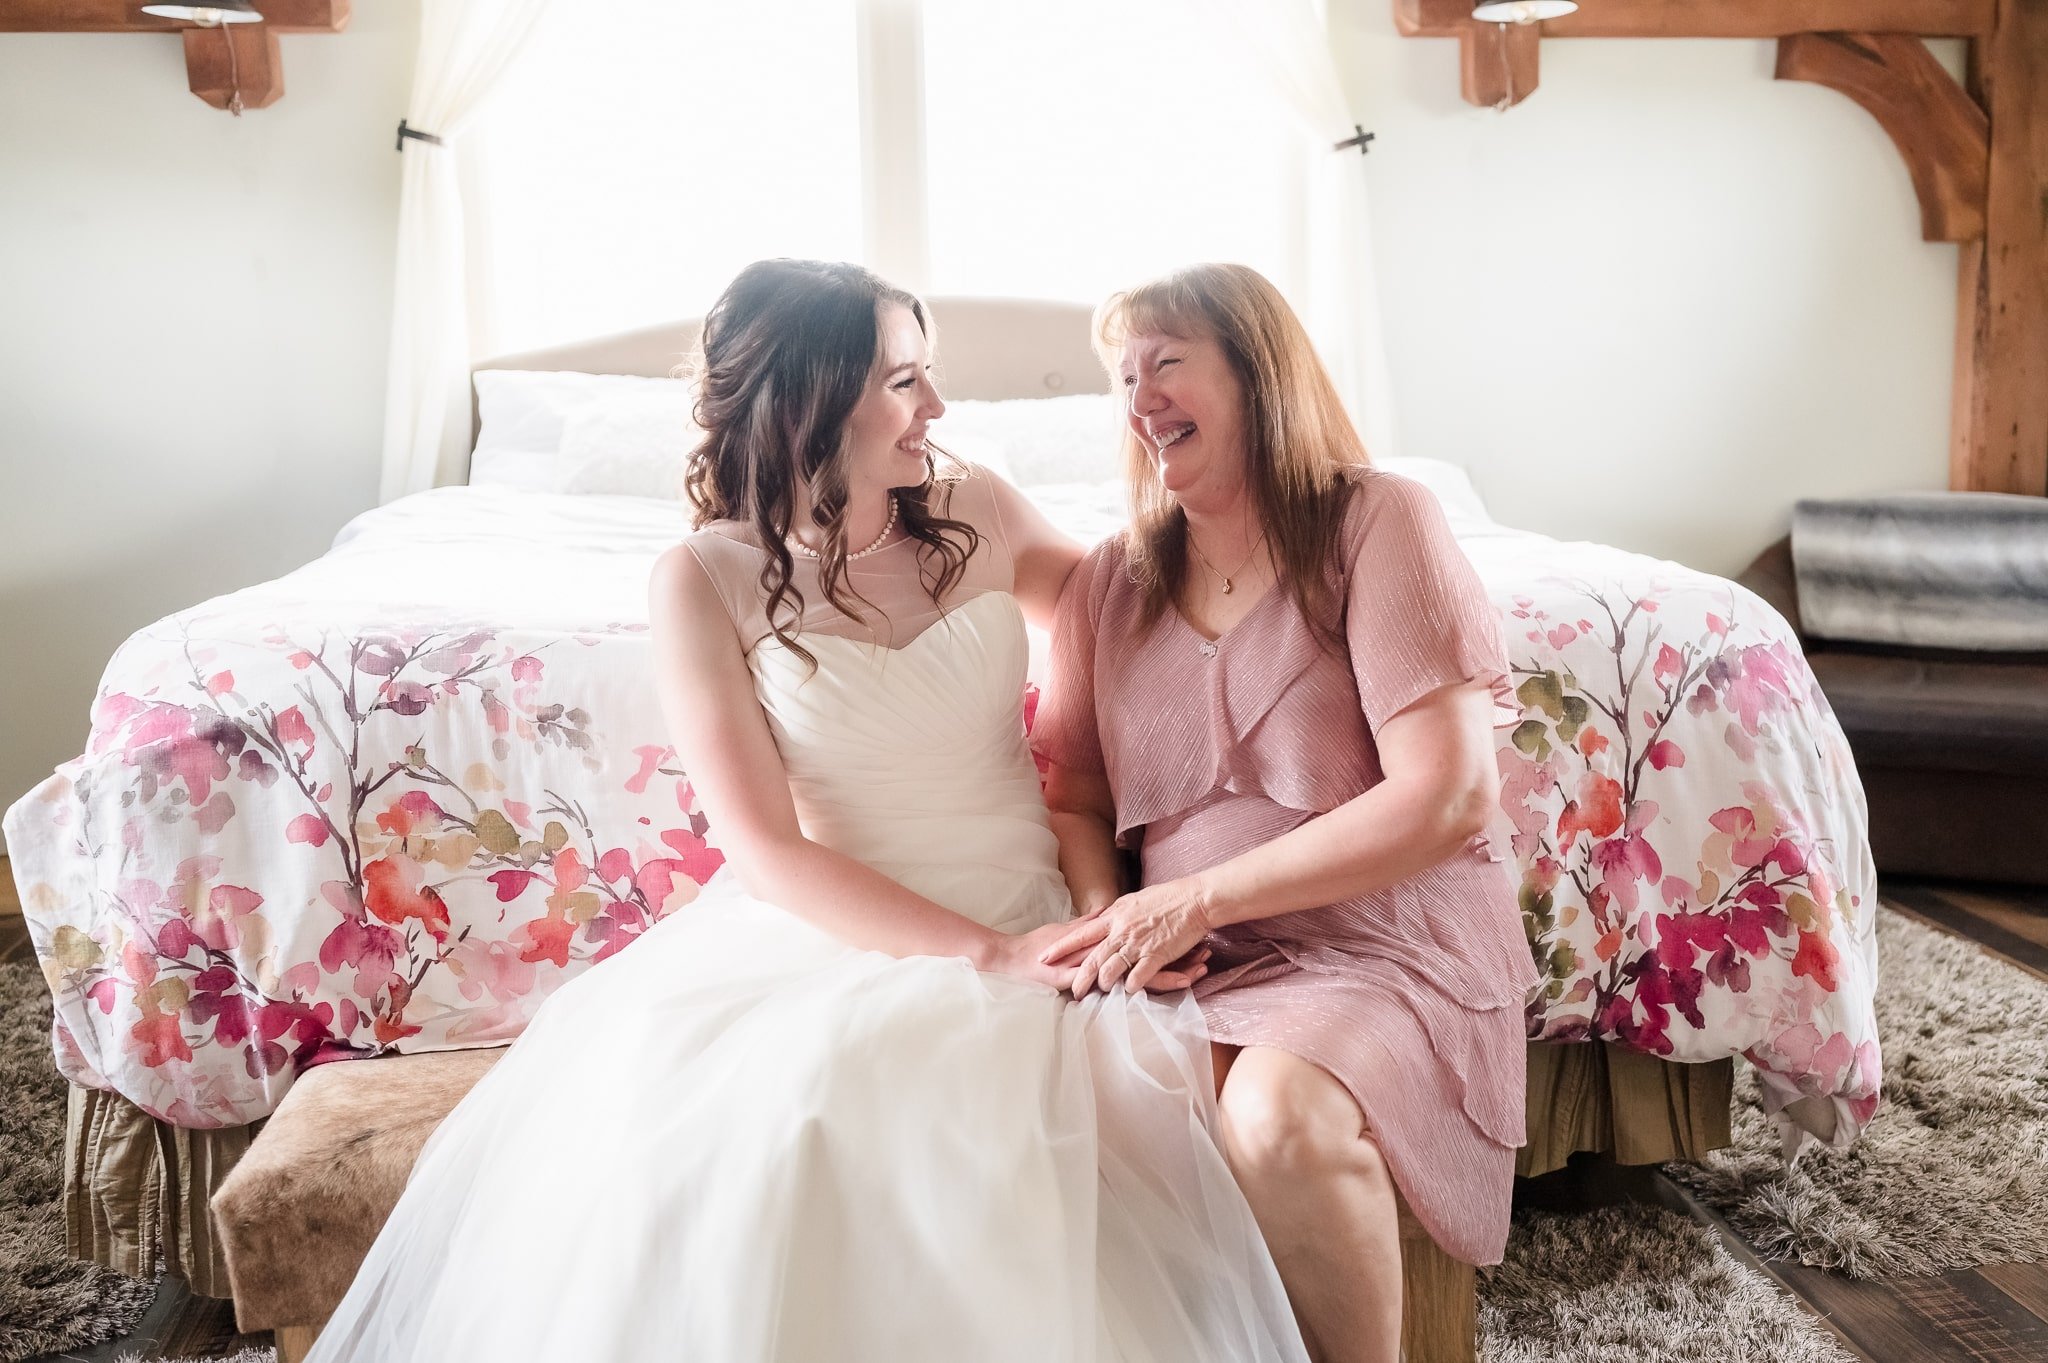 The mother of the bride laughs with her daughter as they sit on the edge of a bench in a bedroom.